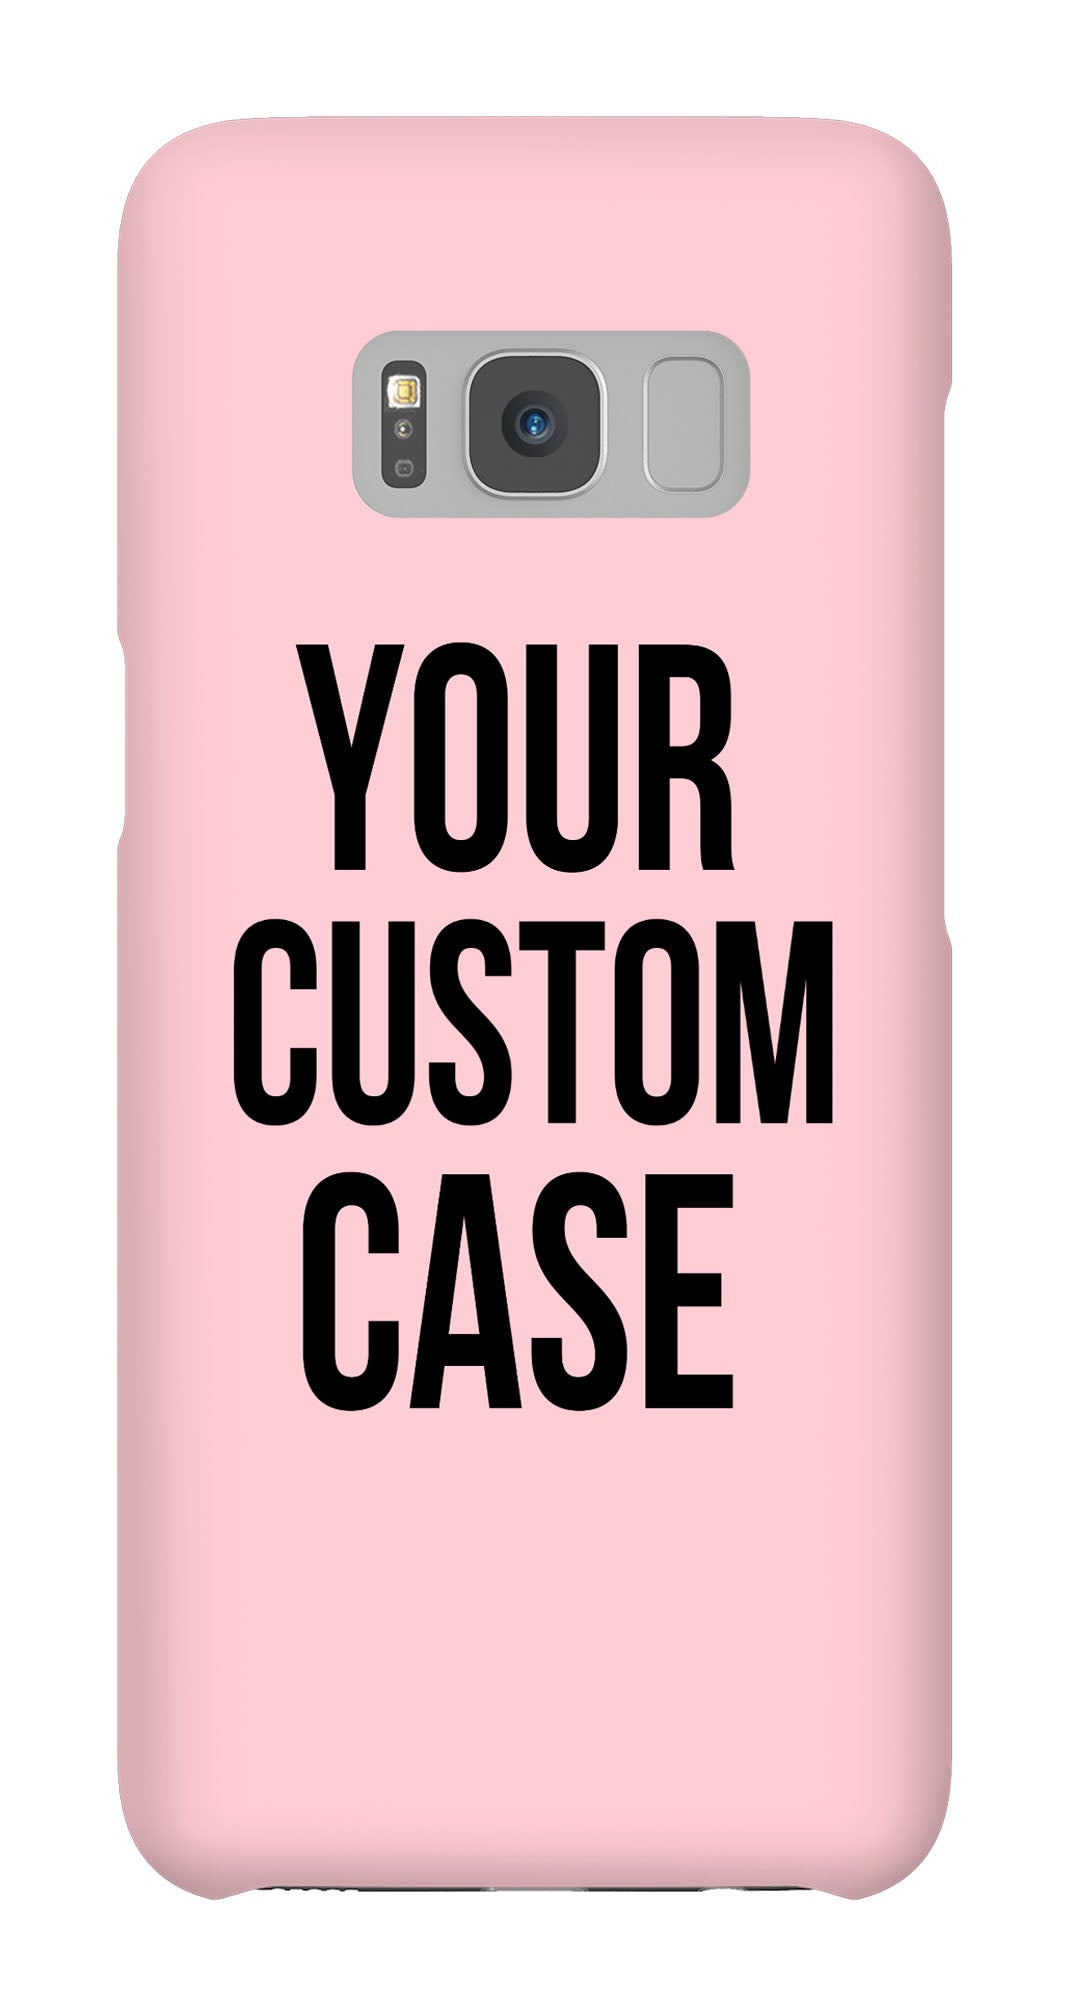 Custom Galaxy S8 Slim Case - Your Custom Design in Cart will be Shipped - Pixly Case